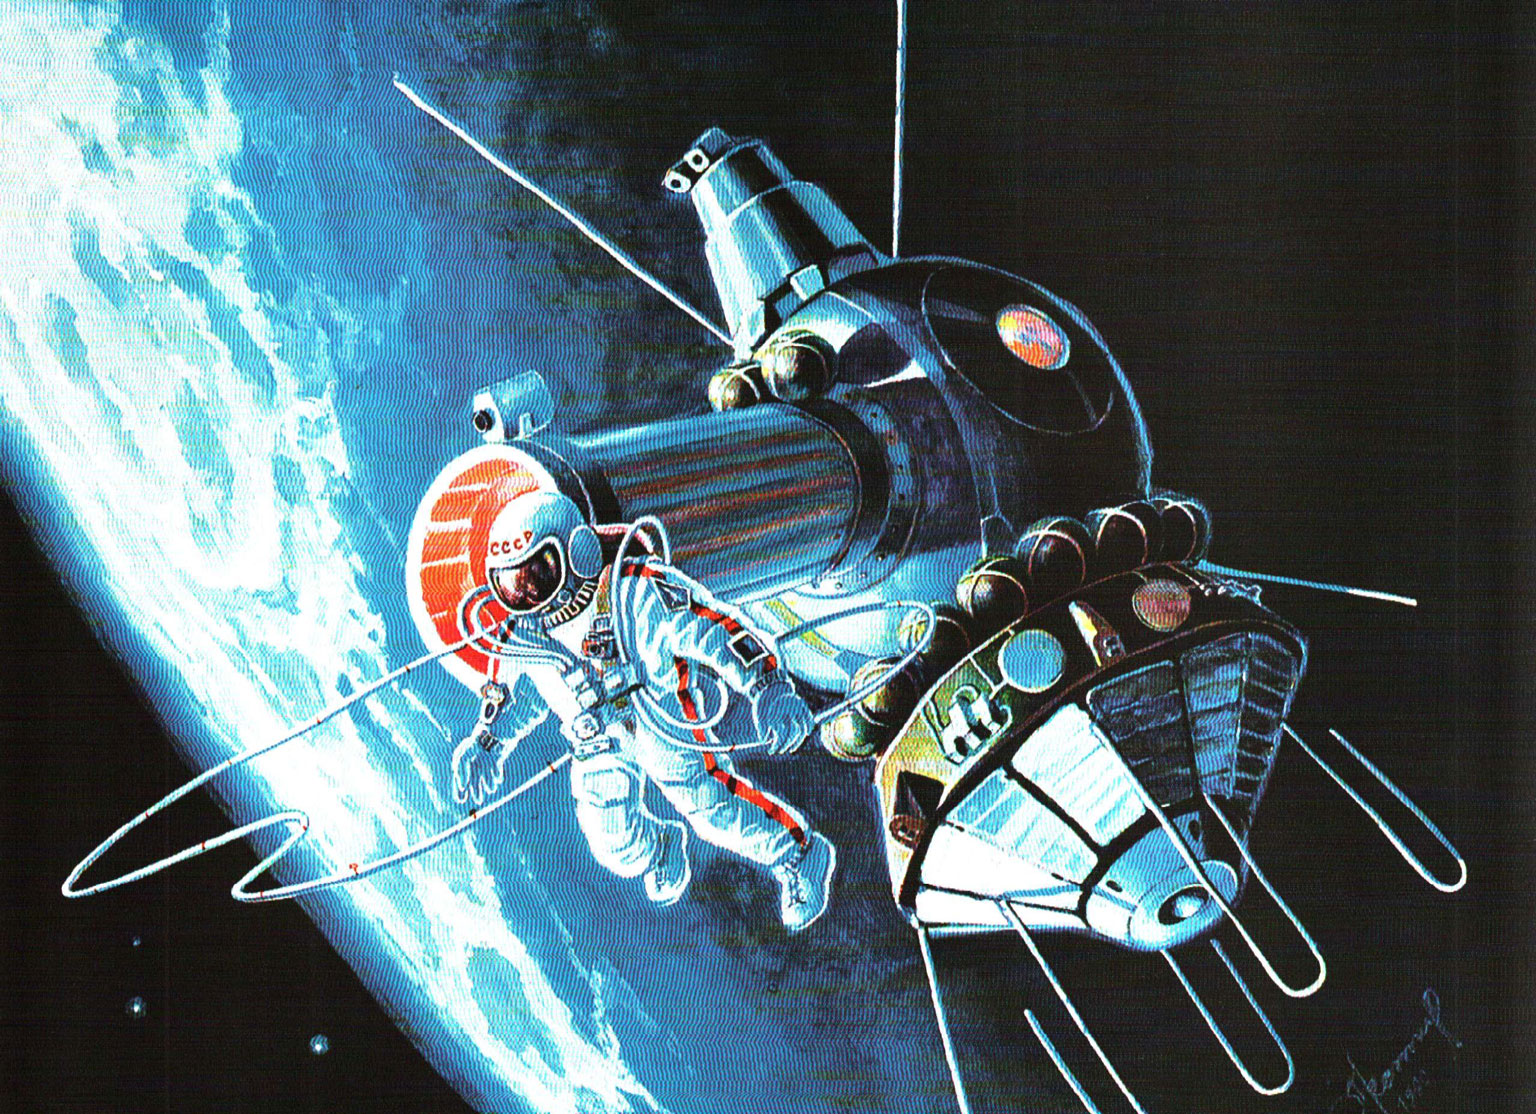 Alexei Leonov, In Free Flow (1965). Oil on canvas. Painted by Alexei Leonov and reproduced by permission of the artist.